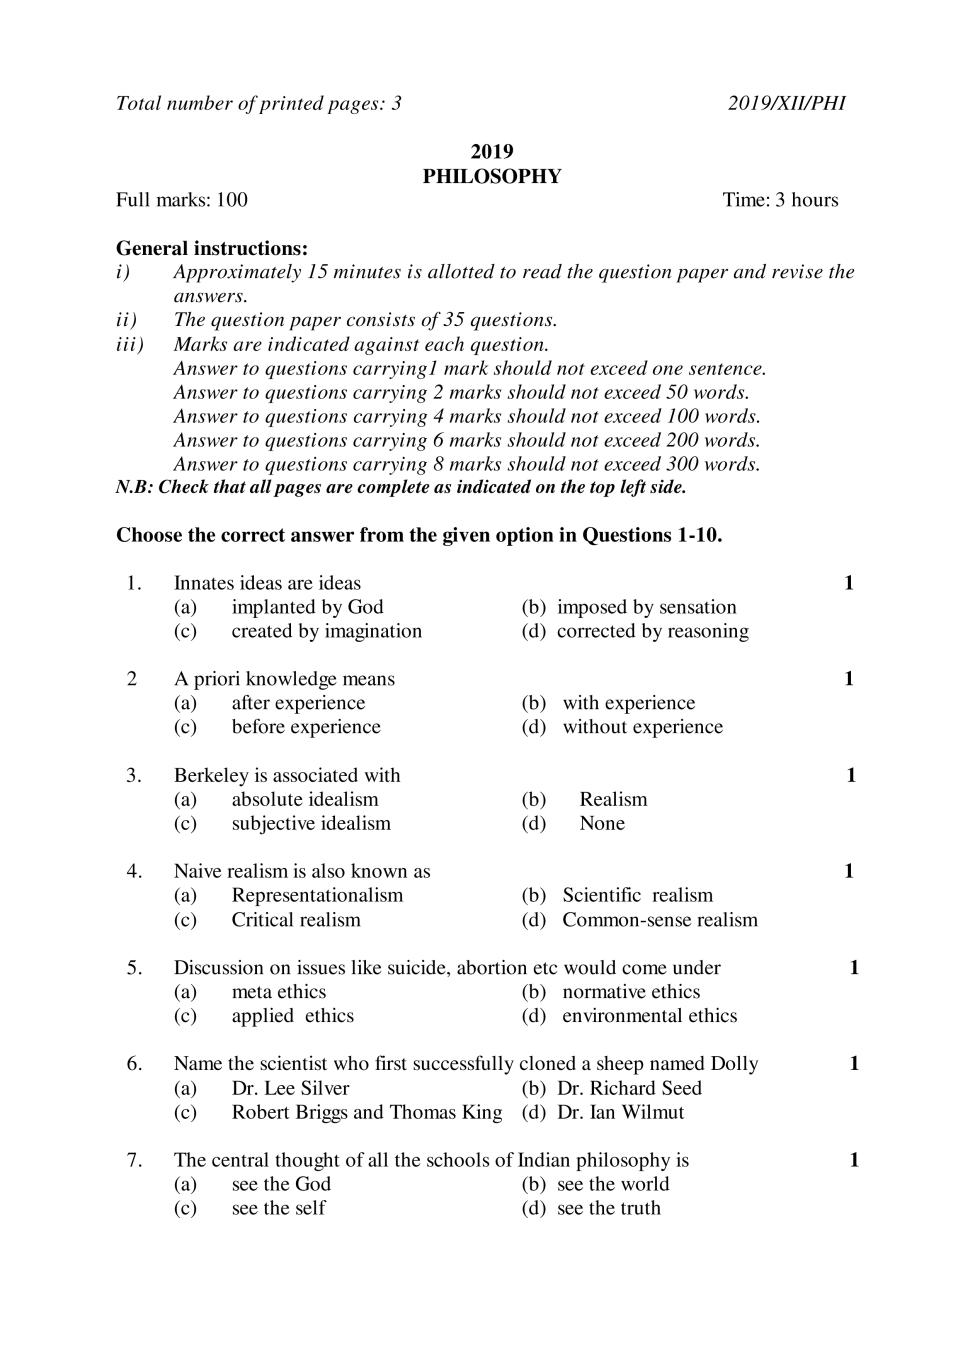 NBSE Class 12 Question Paper 2019 for Fund of Philosophy - Page 1